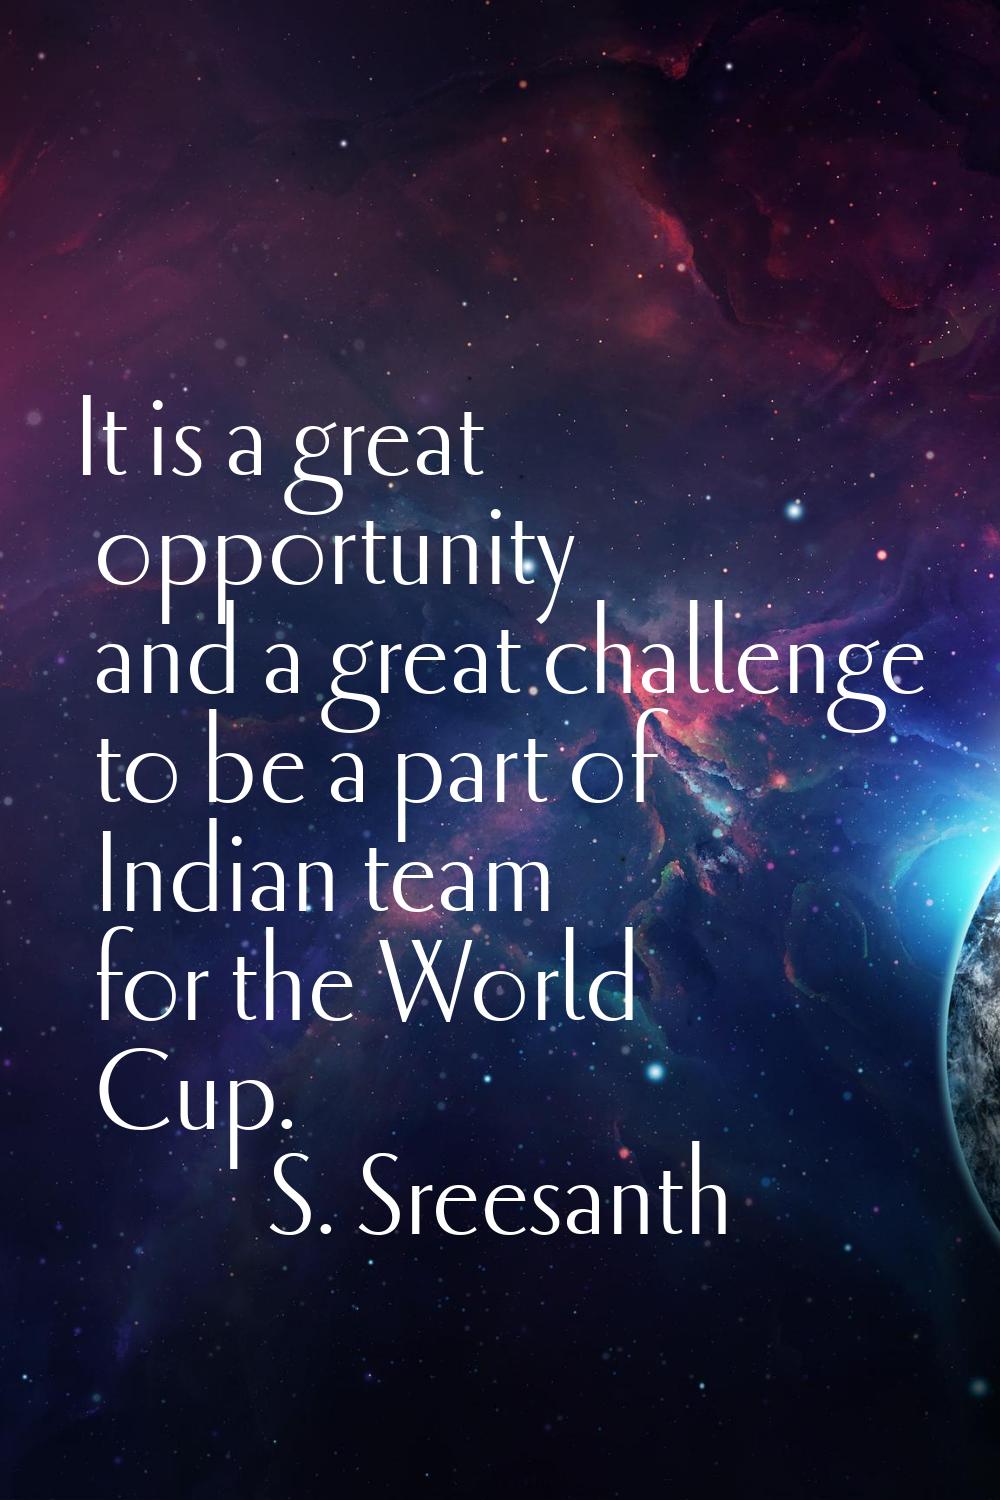 It is a great opportunity and a great challenge to be a part of Indian team for the World Cup.